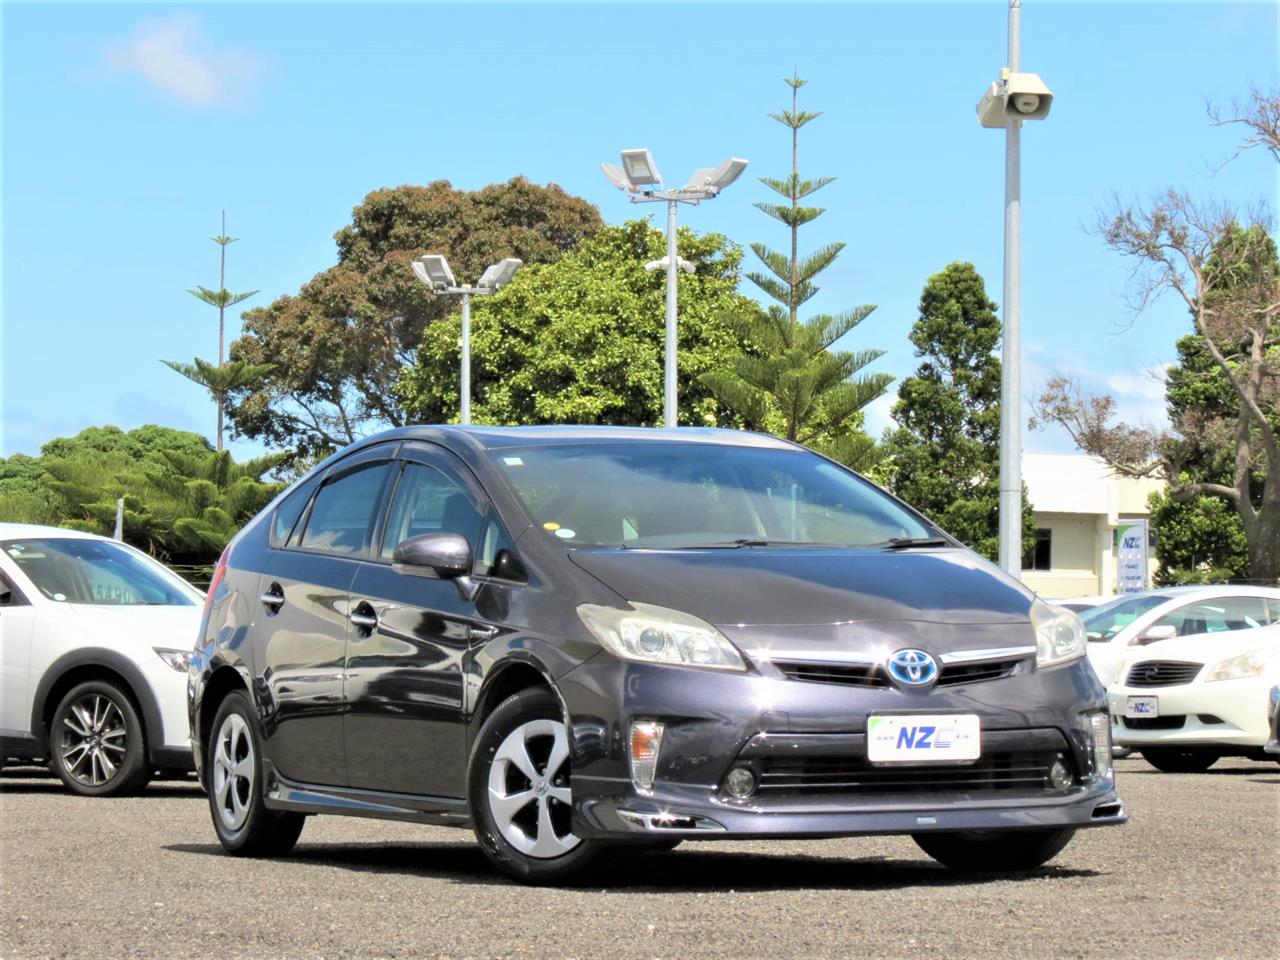 NZC 2013 Toyota Prius just arrived to Auckland